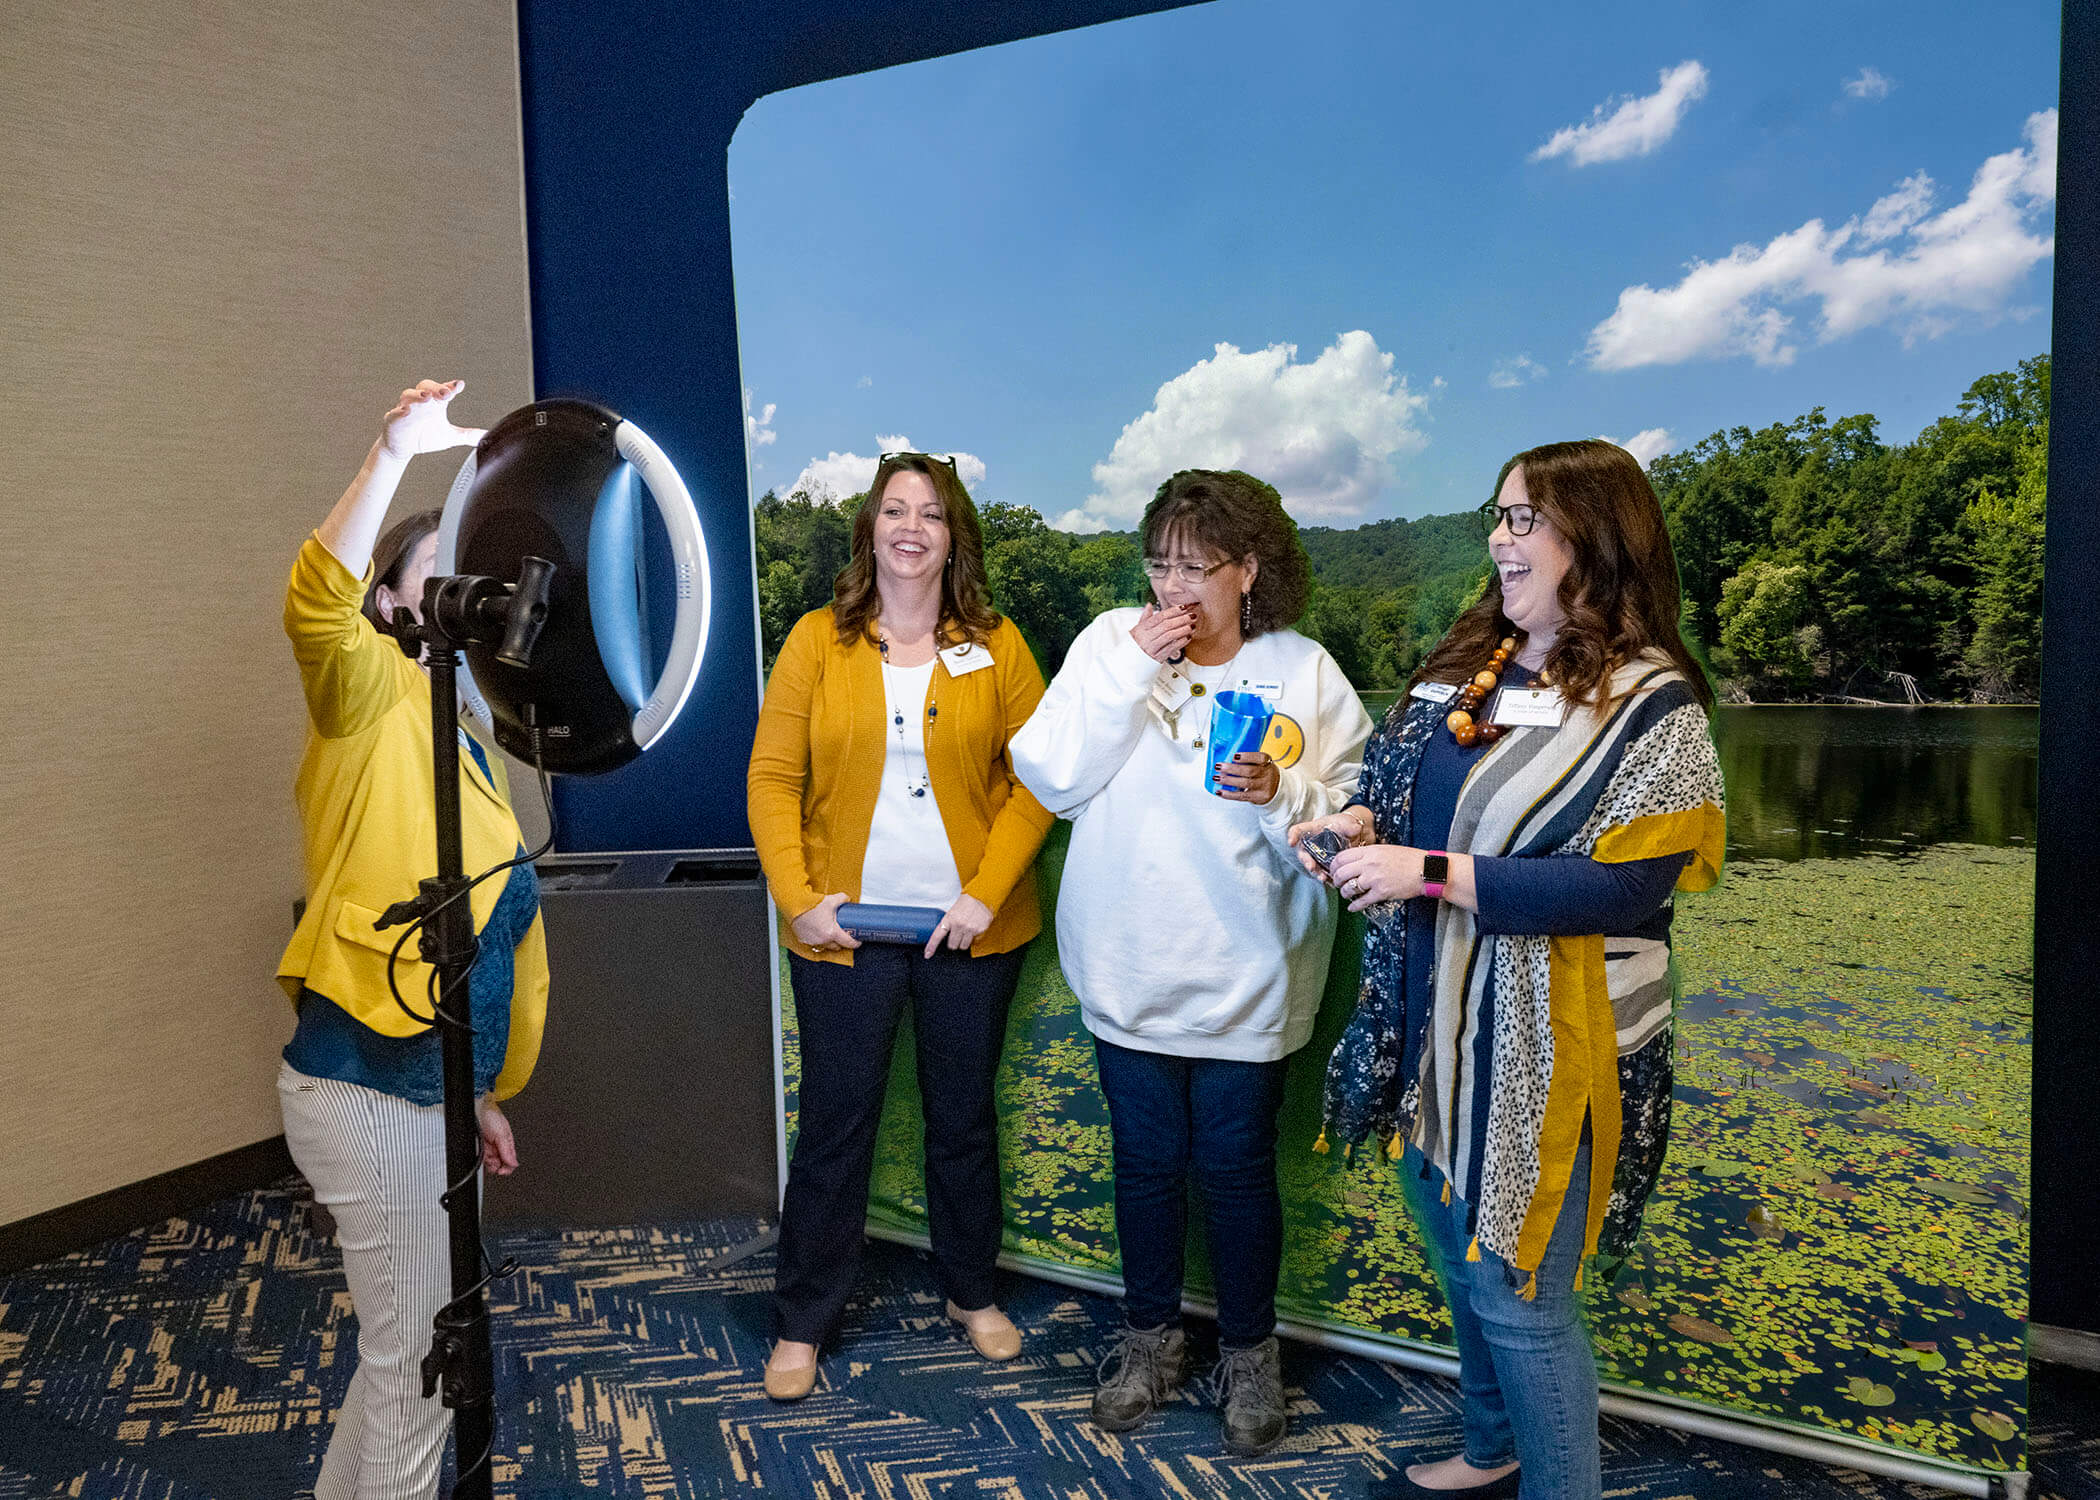 ETSU employees at the Service Awards pose in the selfie booth.